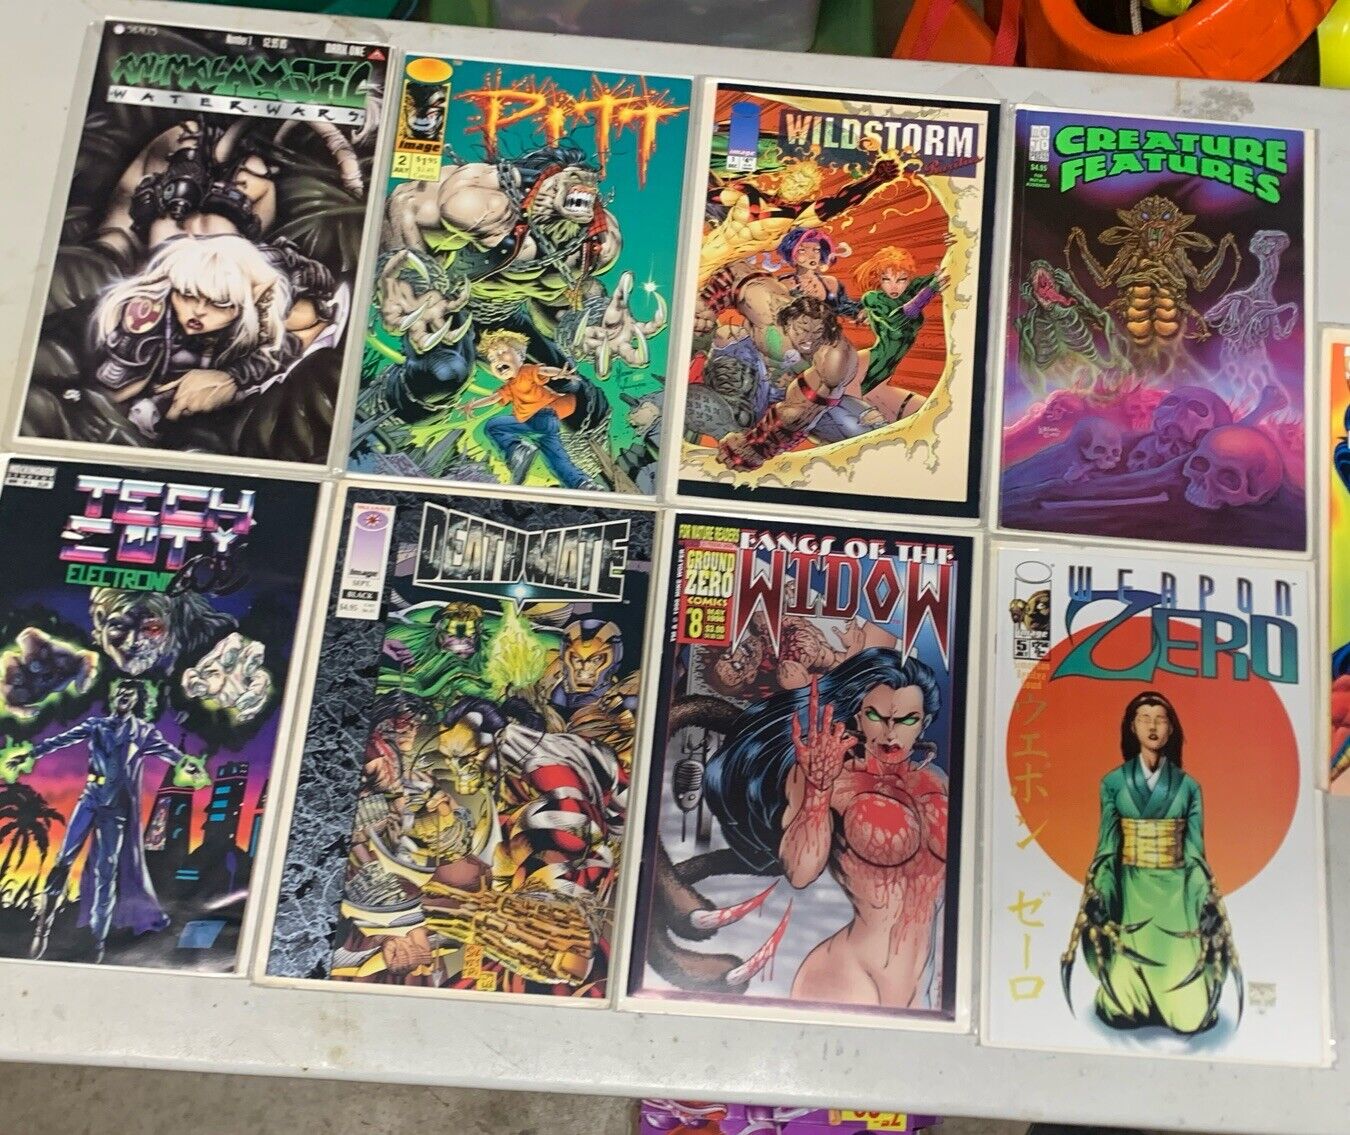 COMIC BOOK MIXED LOT OF 9 Random Comics Bagged Boarded PRICED TO SALE QUICK NM